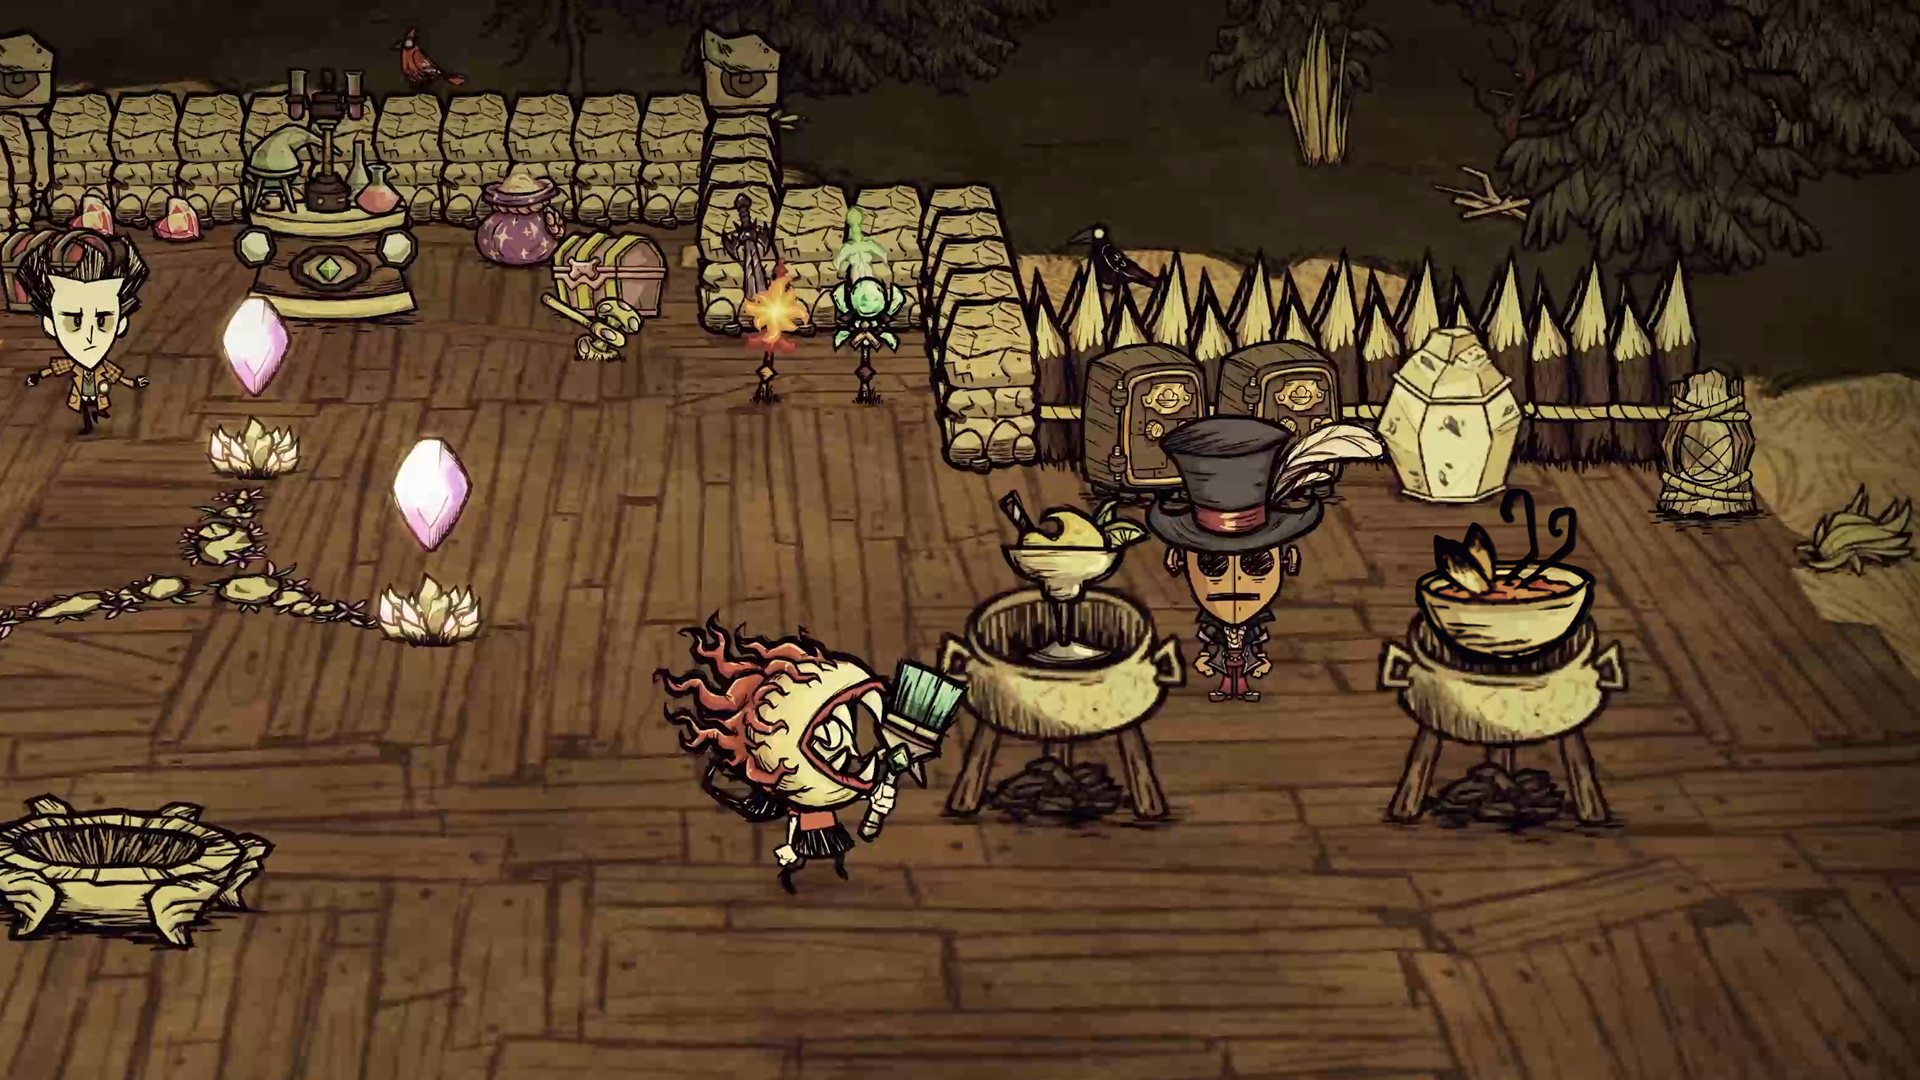 Don't Starve Together and Terraria team up for boss crossovers